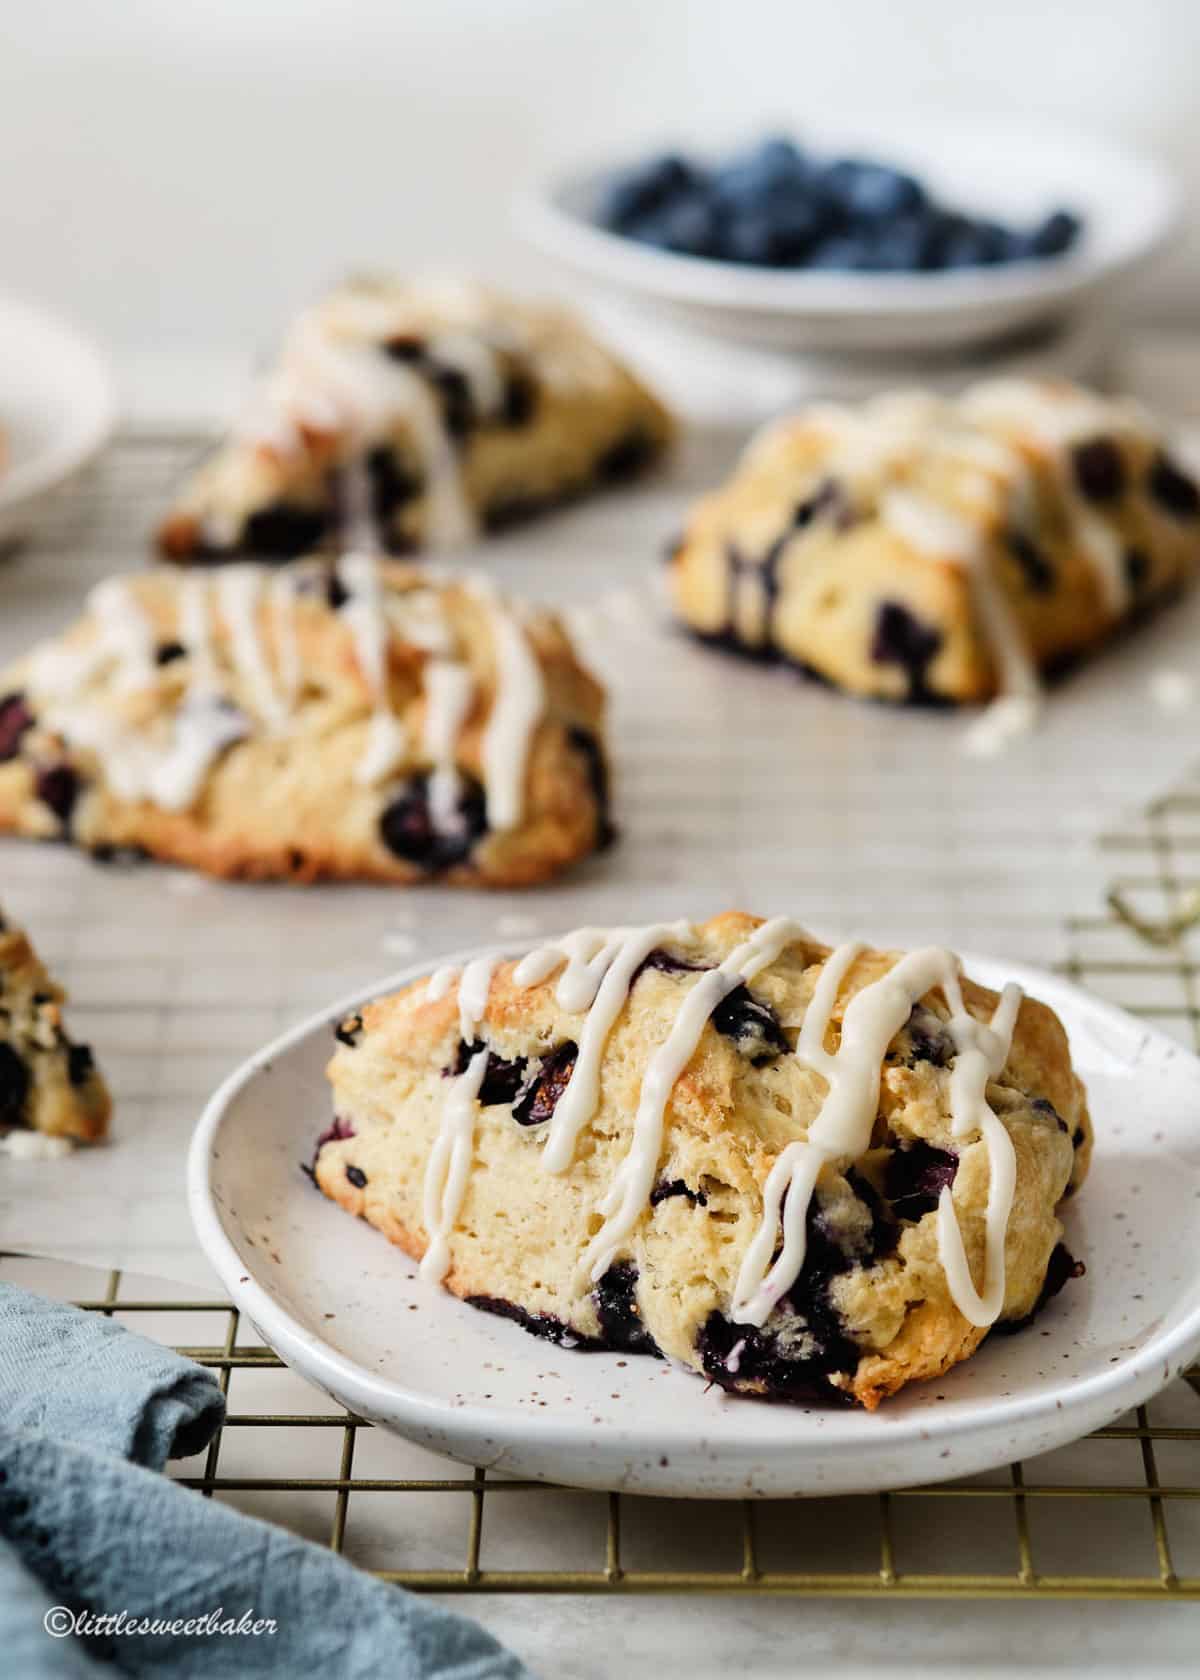 A glazed blueberry scone on a plate with other scones on a cooling rack.